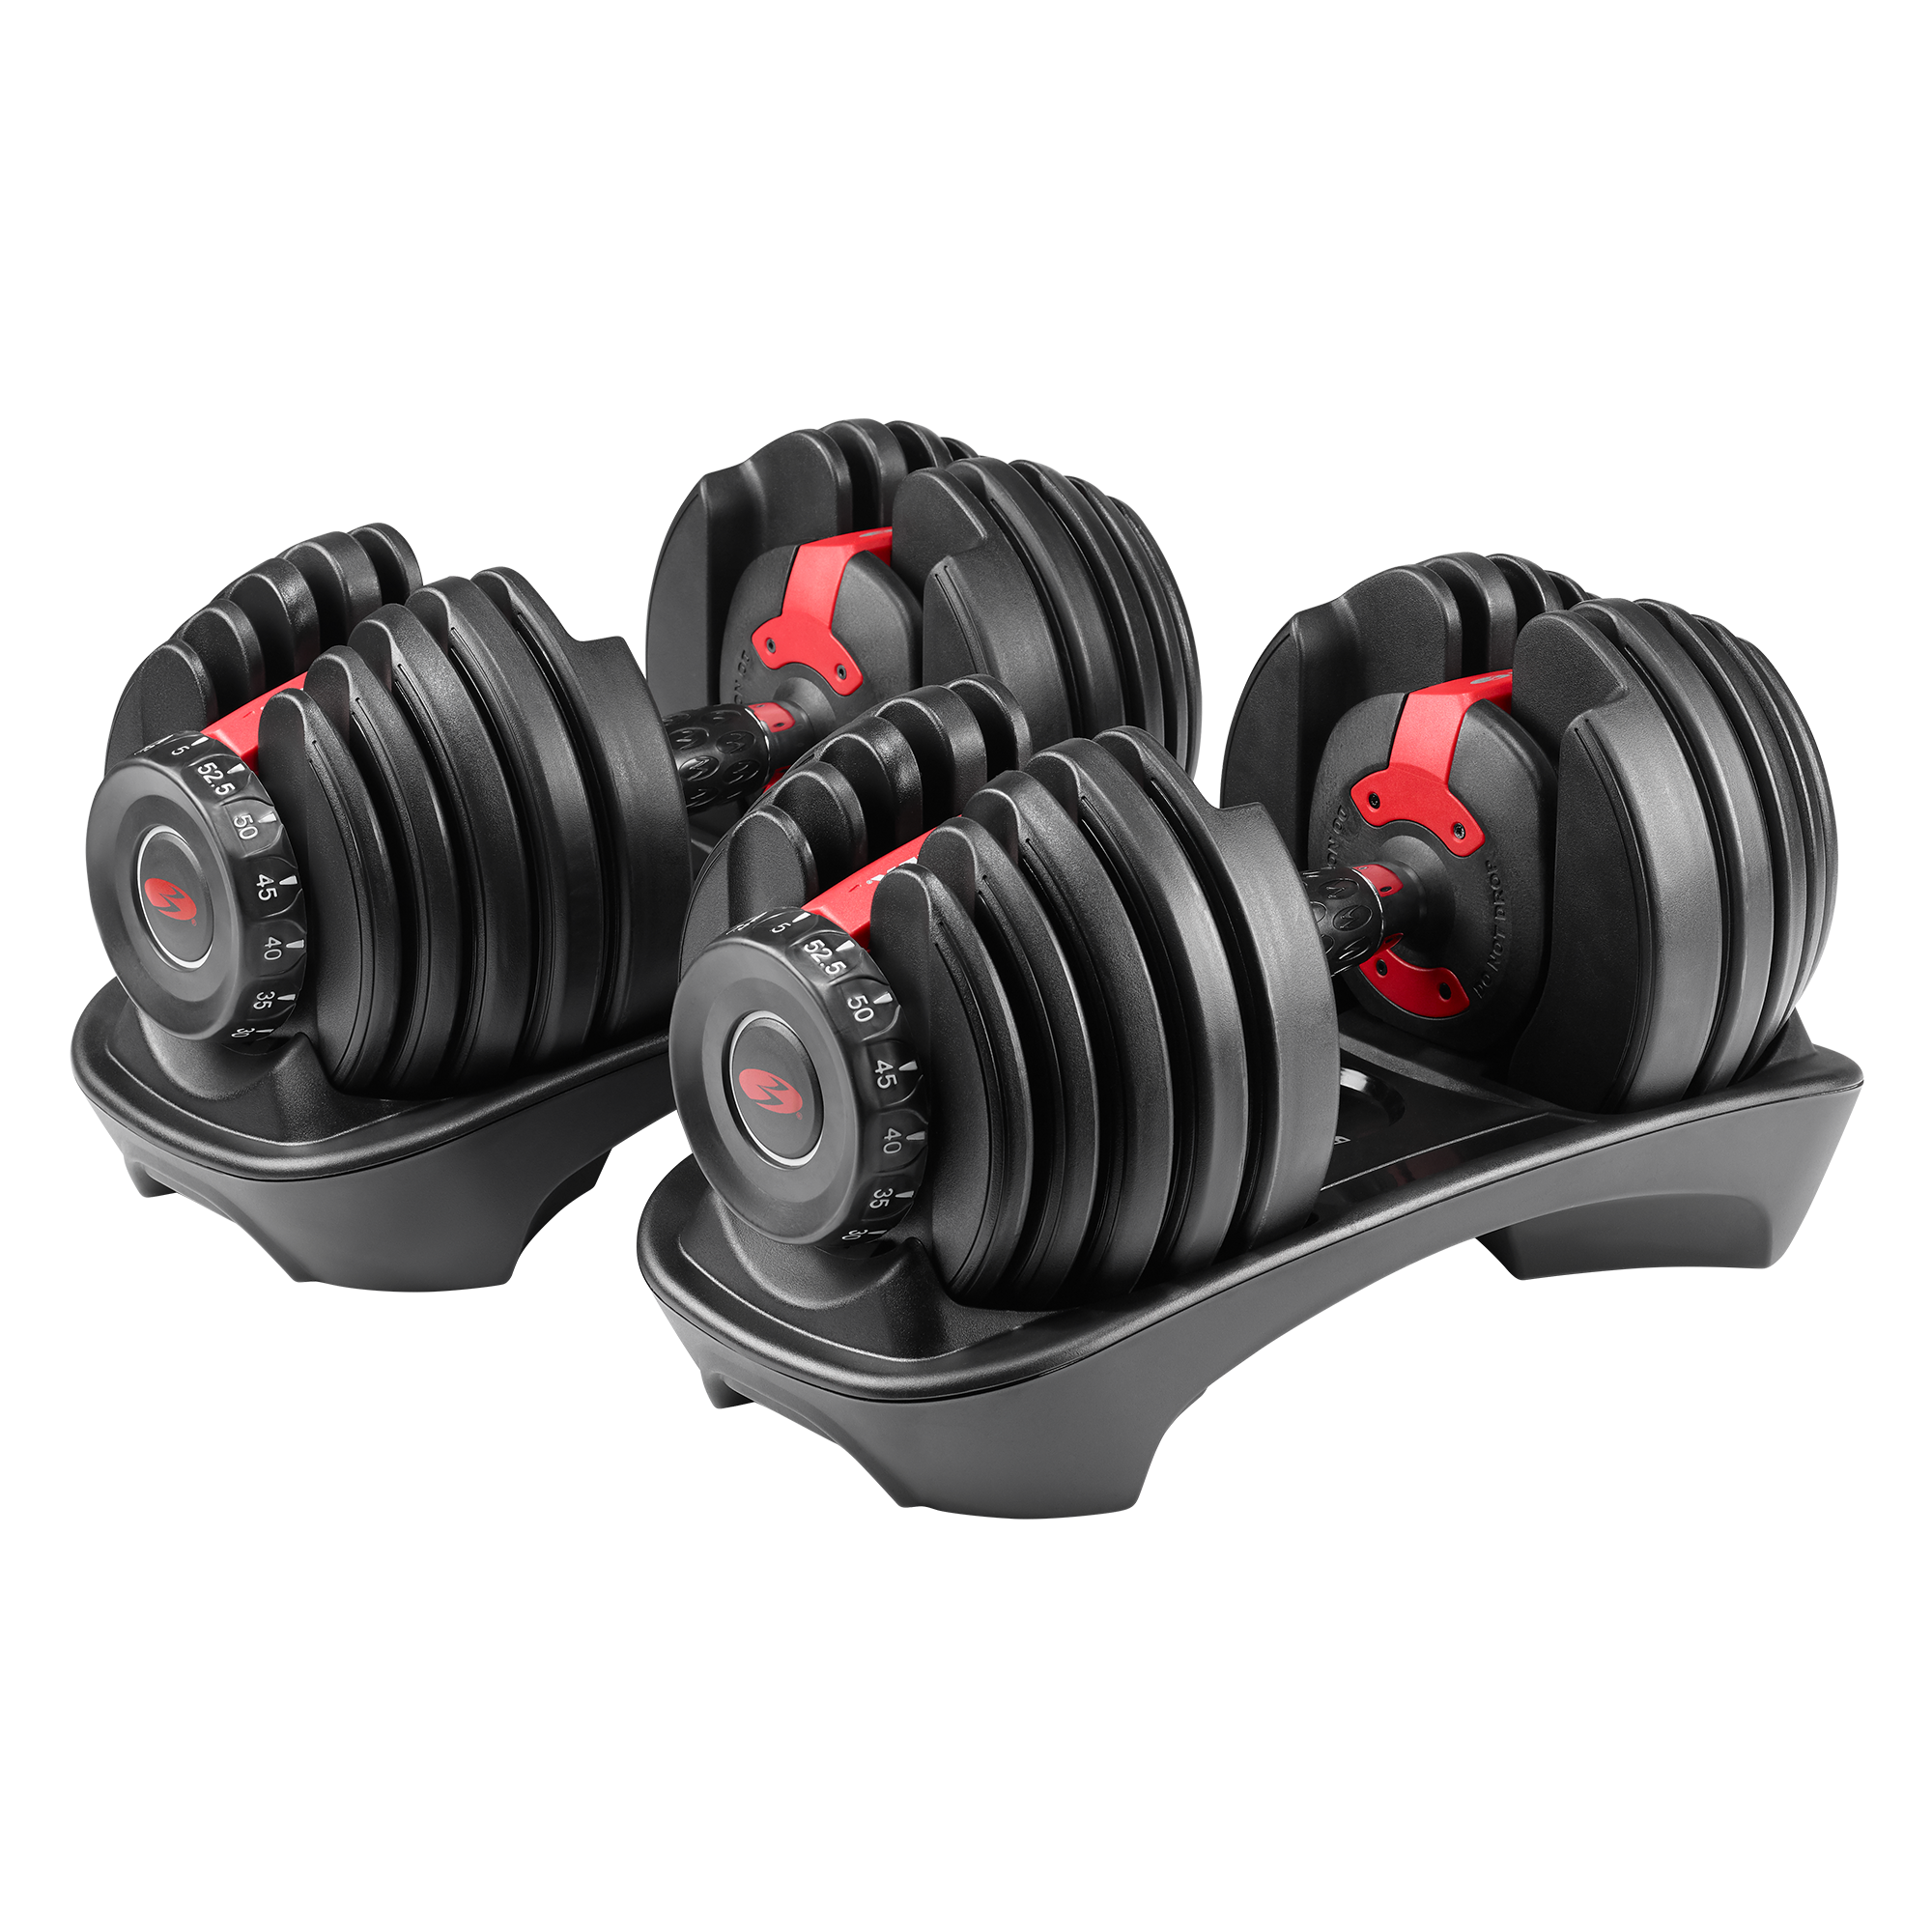 Bowflex SelectTech 552 Adjustable Dumbbell BRAND NEW ships within 24hrs 